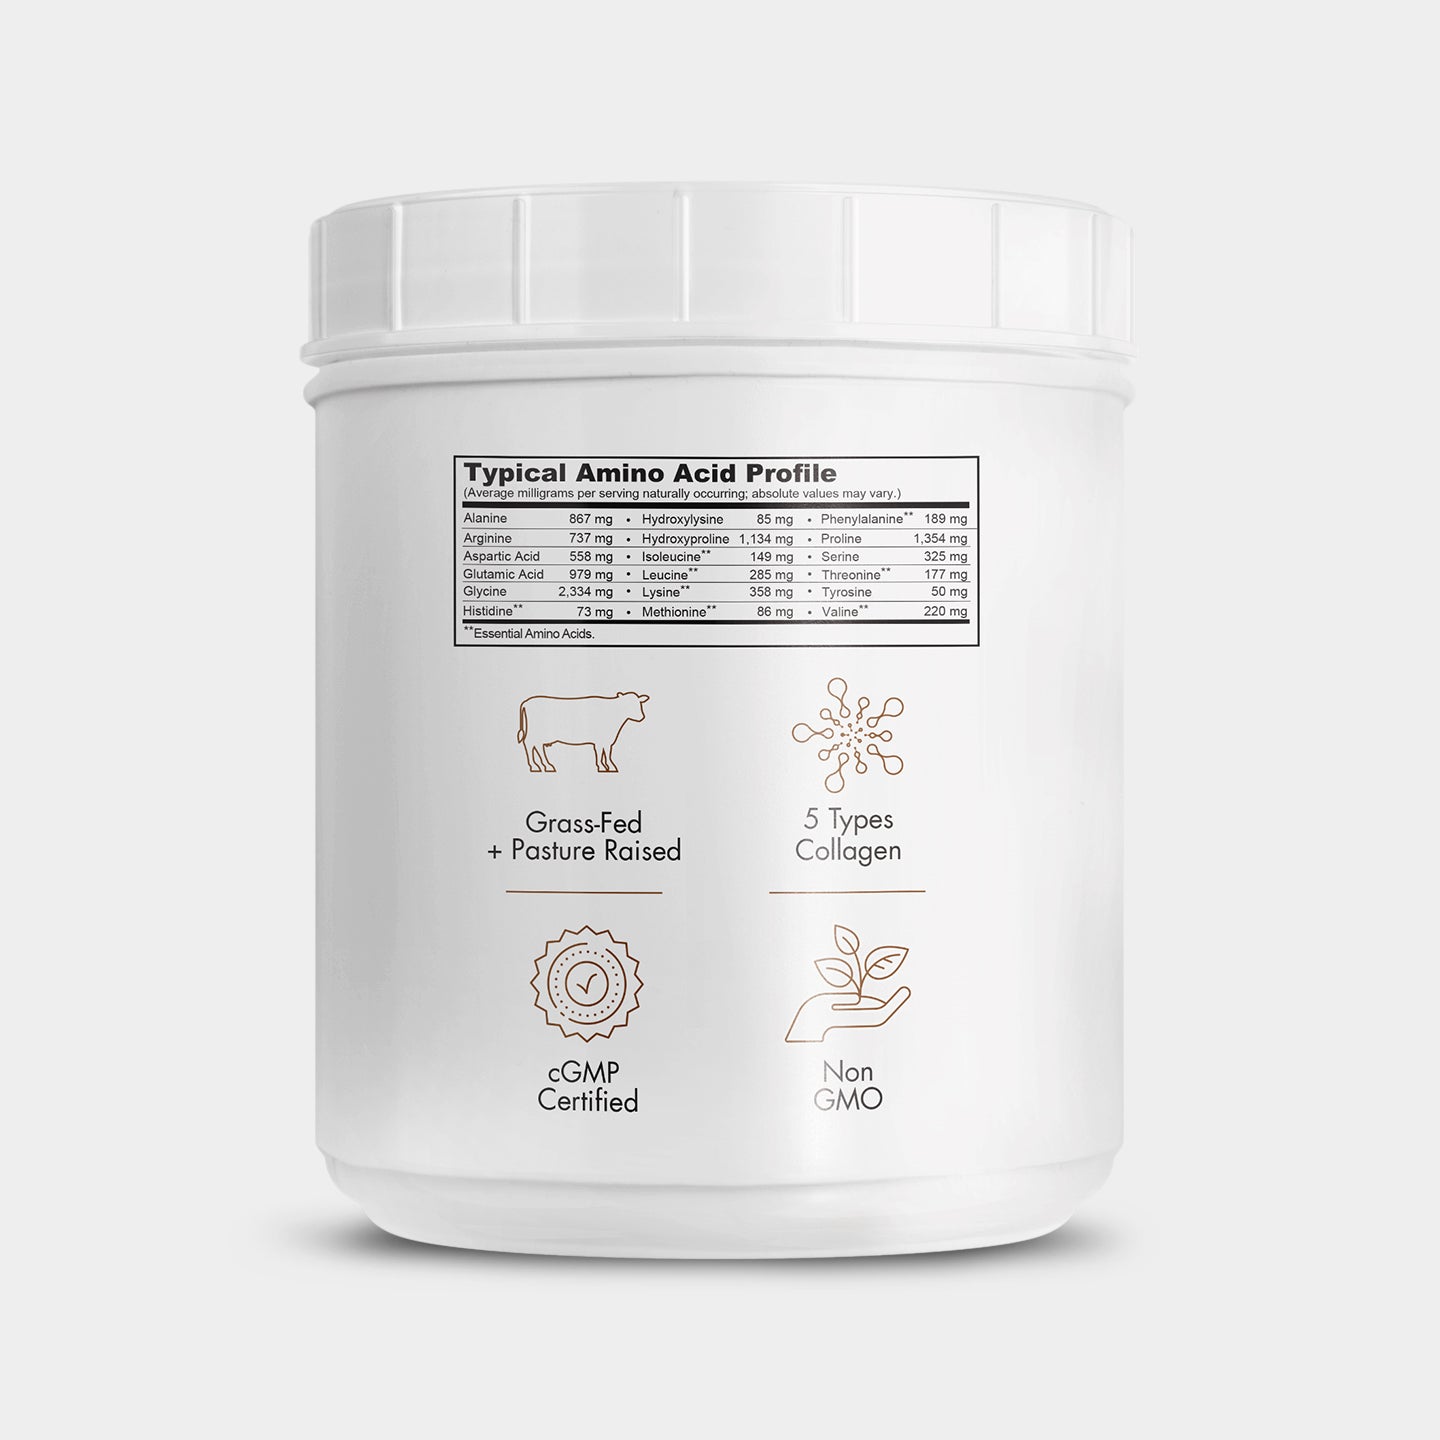 Codeage Multi Collagen Peptides Protein Powder, Chocolate, 30 Servings A2